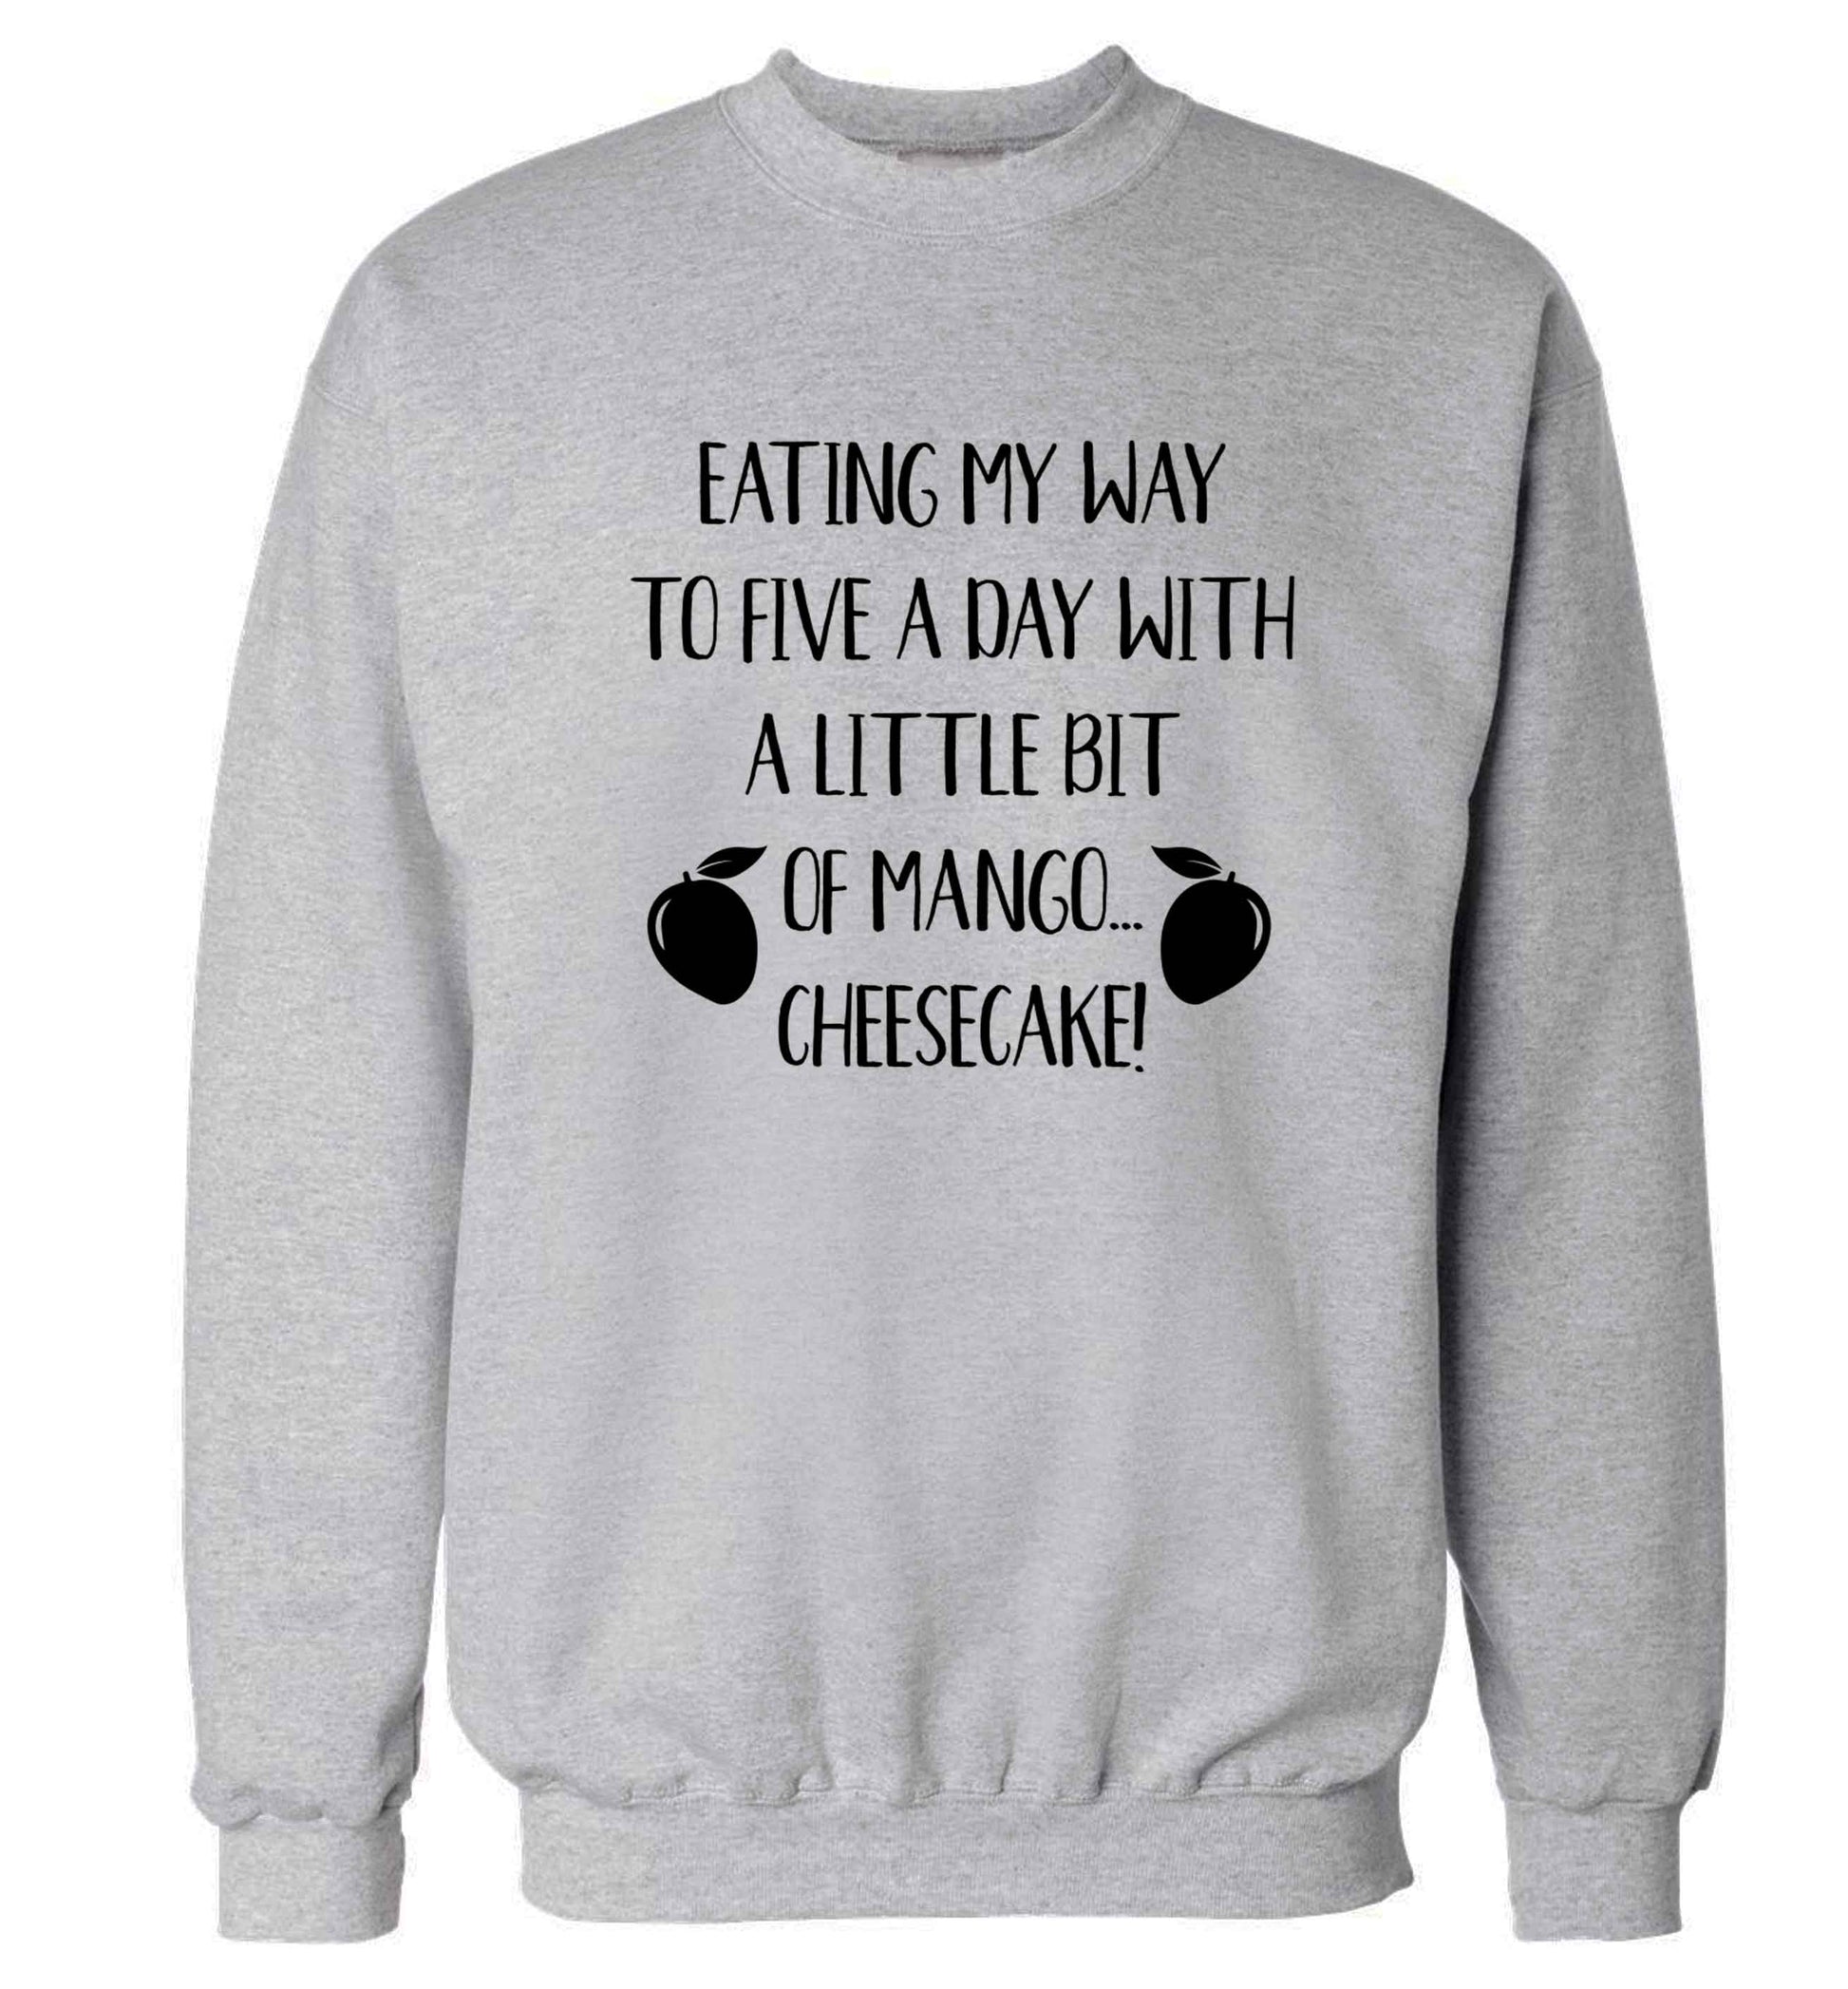 Eating my way to five a day with a little bit of mango cheesecake Adult's unisex grey Sweater 2XL